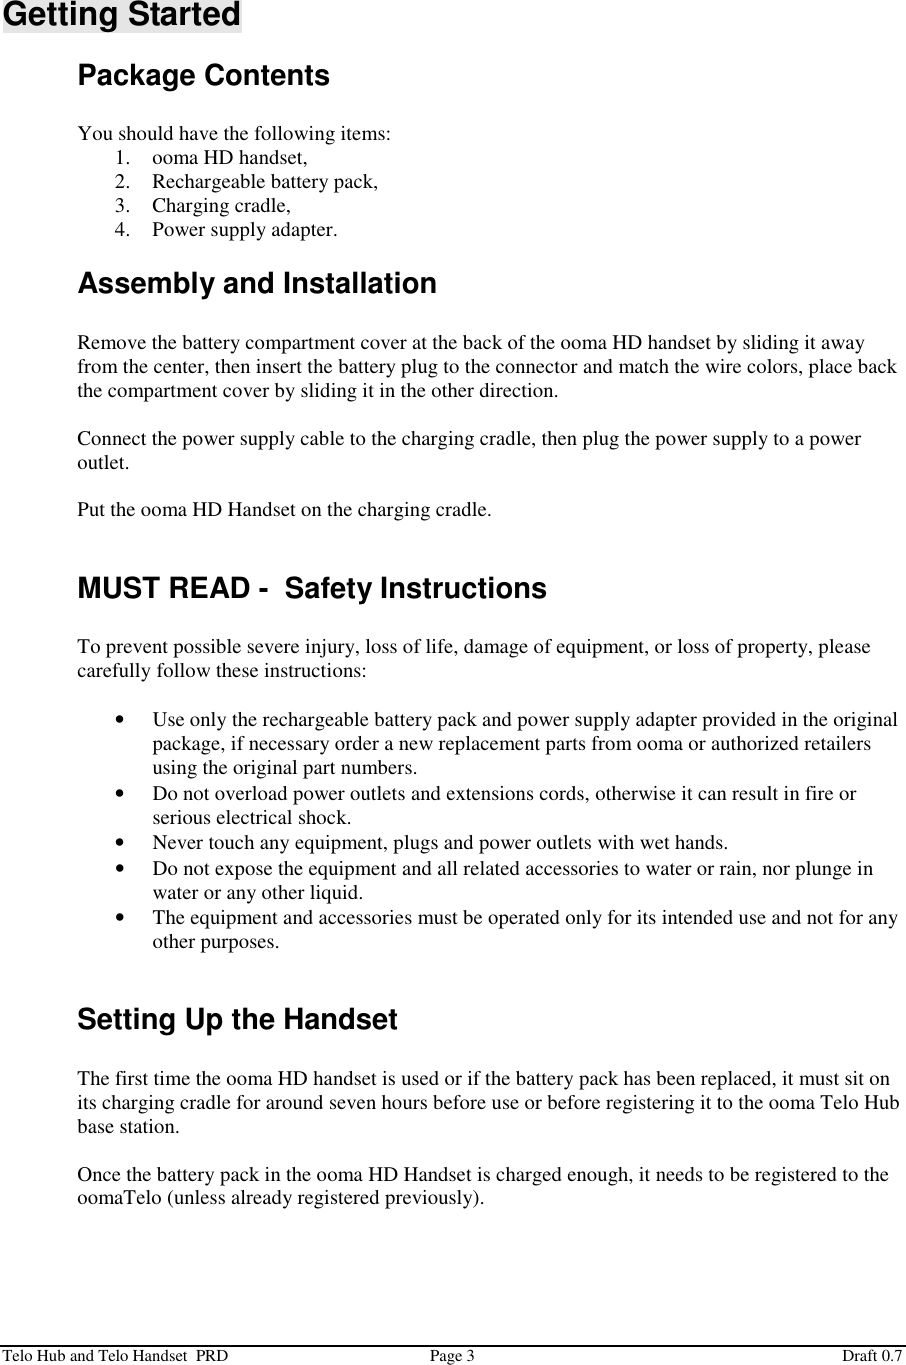  Telo Hub and Telo Handset  PRD  Page 3  Draft 0.7  Getting Started Package Contents  You should have the following items: 1. ooma HD handset, 2. Rechargeable battery pack, 3. Charging cradle, 4. Power supply adapter. Assembly and Installation  Remove the battery compartment cover at the back of the ooma HD handset by sliding it away from the center, then insert the battery plug to the connector and match the wire colors, place back the compartment cover by sliding it in the other direction.  Connect the power supply cable to the charging cradle, then plug the power supply to a power outlet.  Put the ooma HD Handset on the charging cradle.  MUST READ -  Safety Instructions  To prevent possible severe injury, loss of life, damage of equipment, or loss of property, please carefully follow these instructions:  • Use only the rechargeable battery pack and power supply adapter provided in the original package, if necessary order a new replacement parts from ooma or authorized retailers using the original part numbers. • Do not overload power outlets and extensions cords, otherwise it can result in fire or serious electrical shock. • Never touch any equipment, plugs and power outlets with wet hands. • Do not expose the equipment and all related accessories to water or rain, nor plunge in water or any other liquid. • The equipment and accessories must be operated only for its intended use and not for any other purposes.  Setting Up the Handset  The first time the ooma HD handset is used or if the battery pack has been replaced, it must sit on its charging cradle for around seven hours before use or before registering it to the ooma Telo Hub base station.  Once the battery pack in the ooma HD Handset is charged enough, it needs to be registered to the oomaTelo (unless already registered previously).  